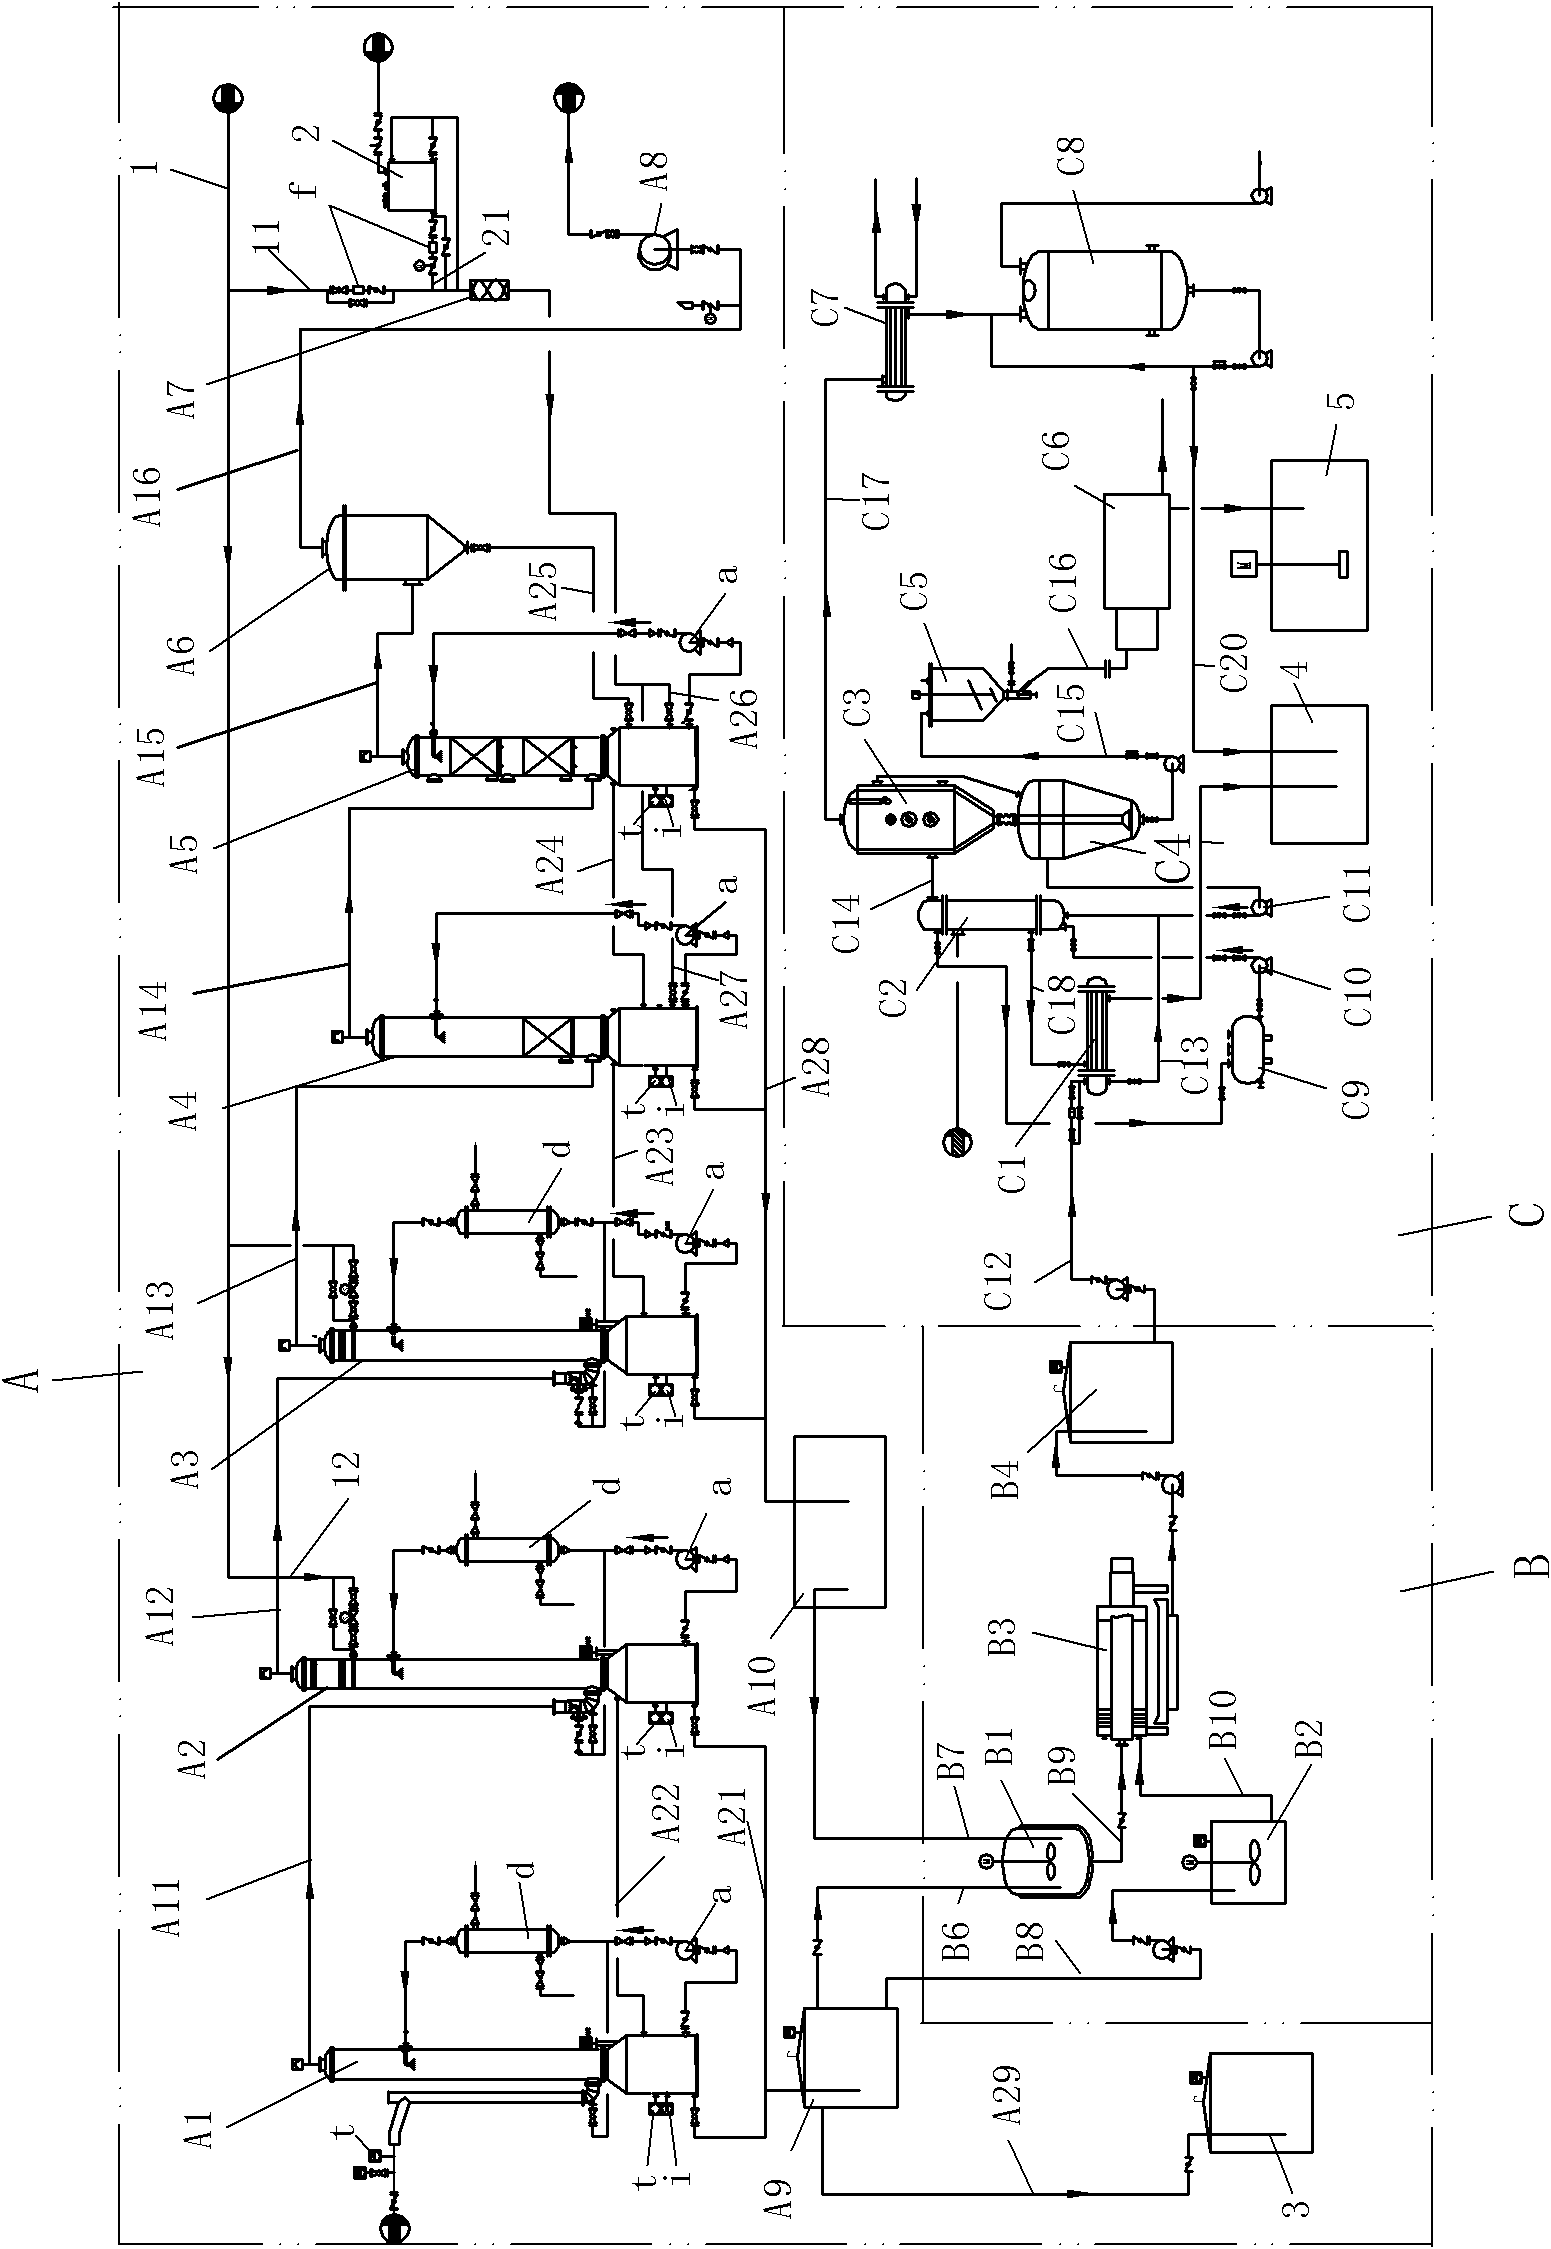 System for industrial waste gas treatment and salt regeneration